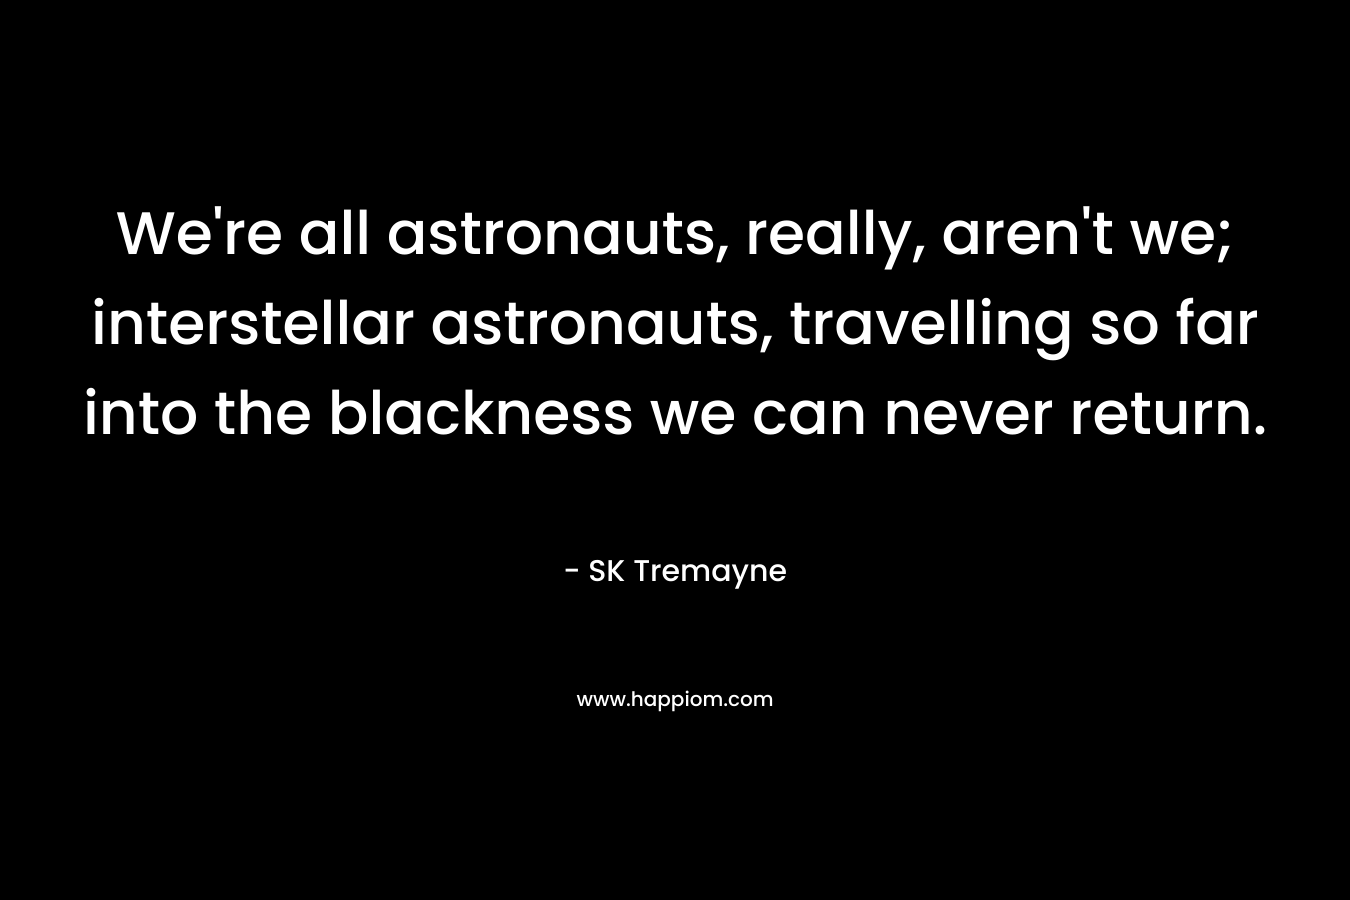 We’re all astronauts, really, aren’t we; interstellar astronauts, travelling so far into the blackness we can never return. – SK Tremayne